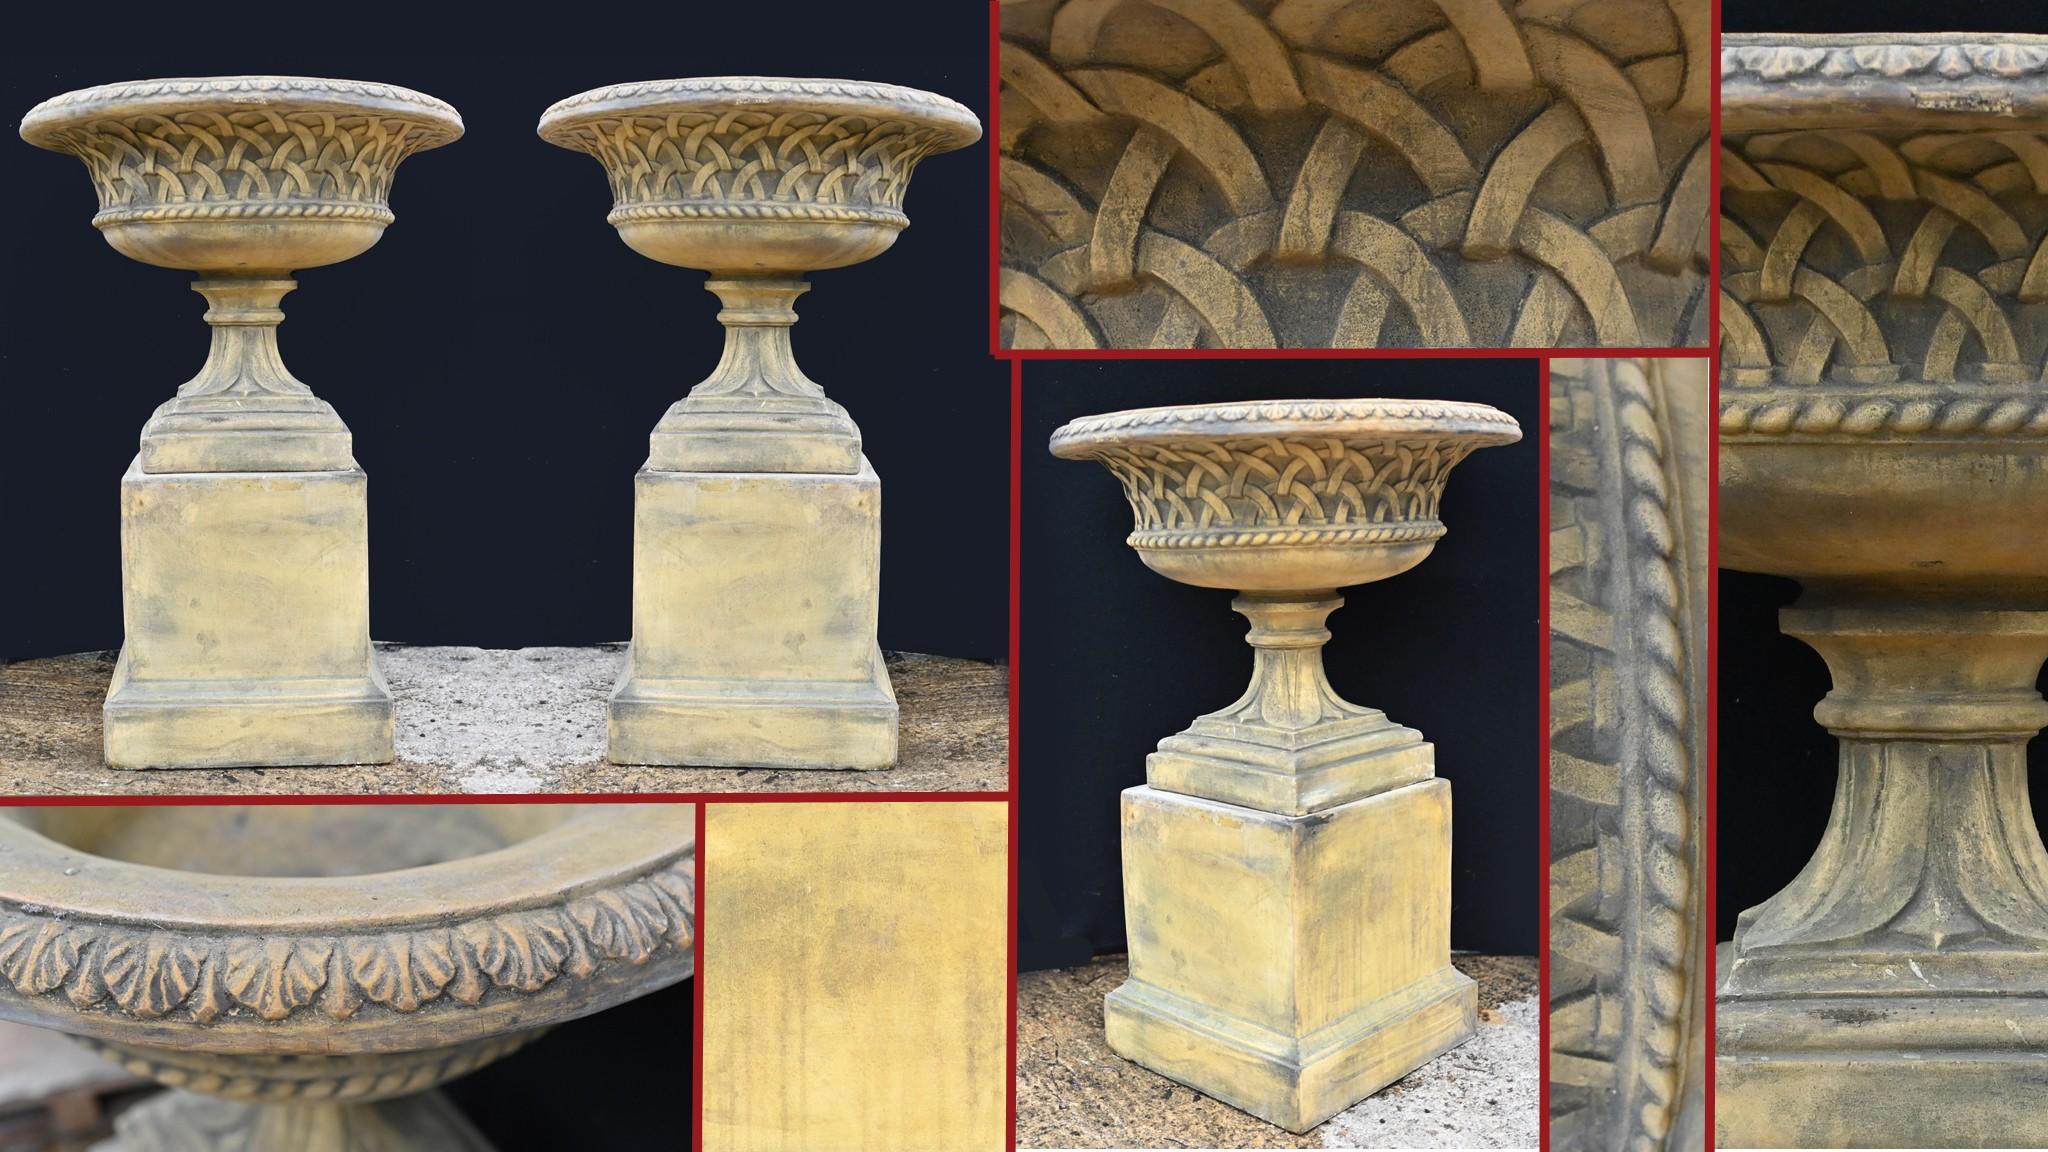 Pair of gorgeous terracotta garden urns on pedestal base
Classic campana form and adorned with Celtic gothic motifs
Great pair for the garden, can you imagine how these would look overflowing with flowers? 
Please let us know if you would like to